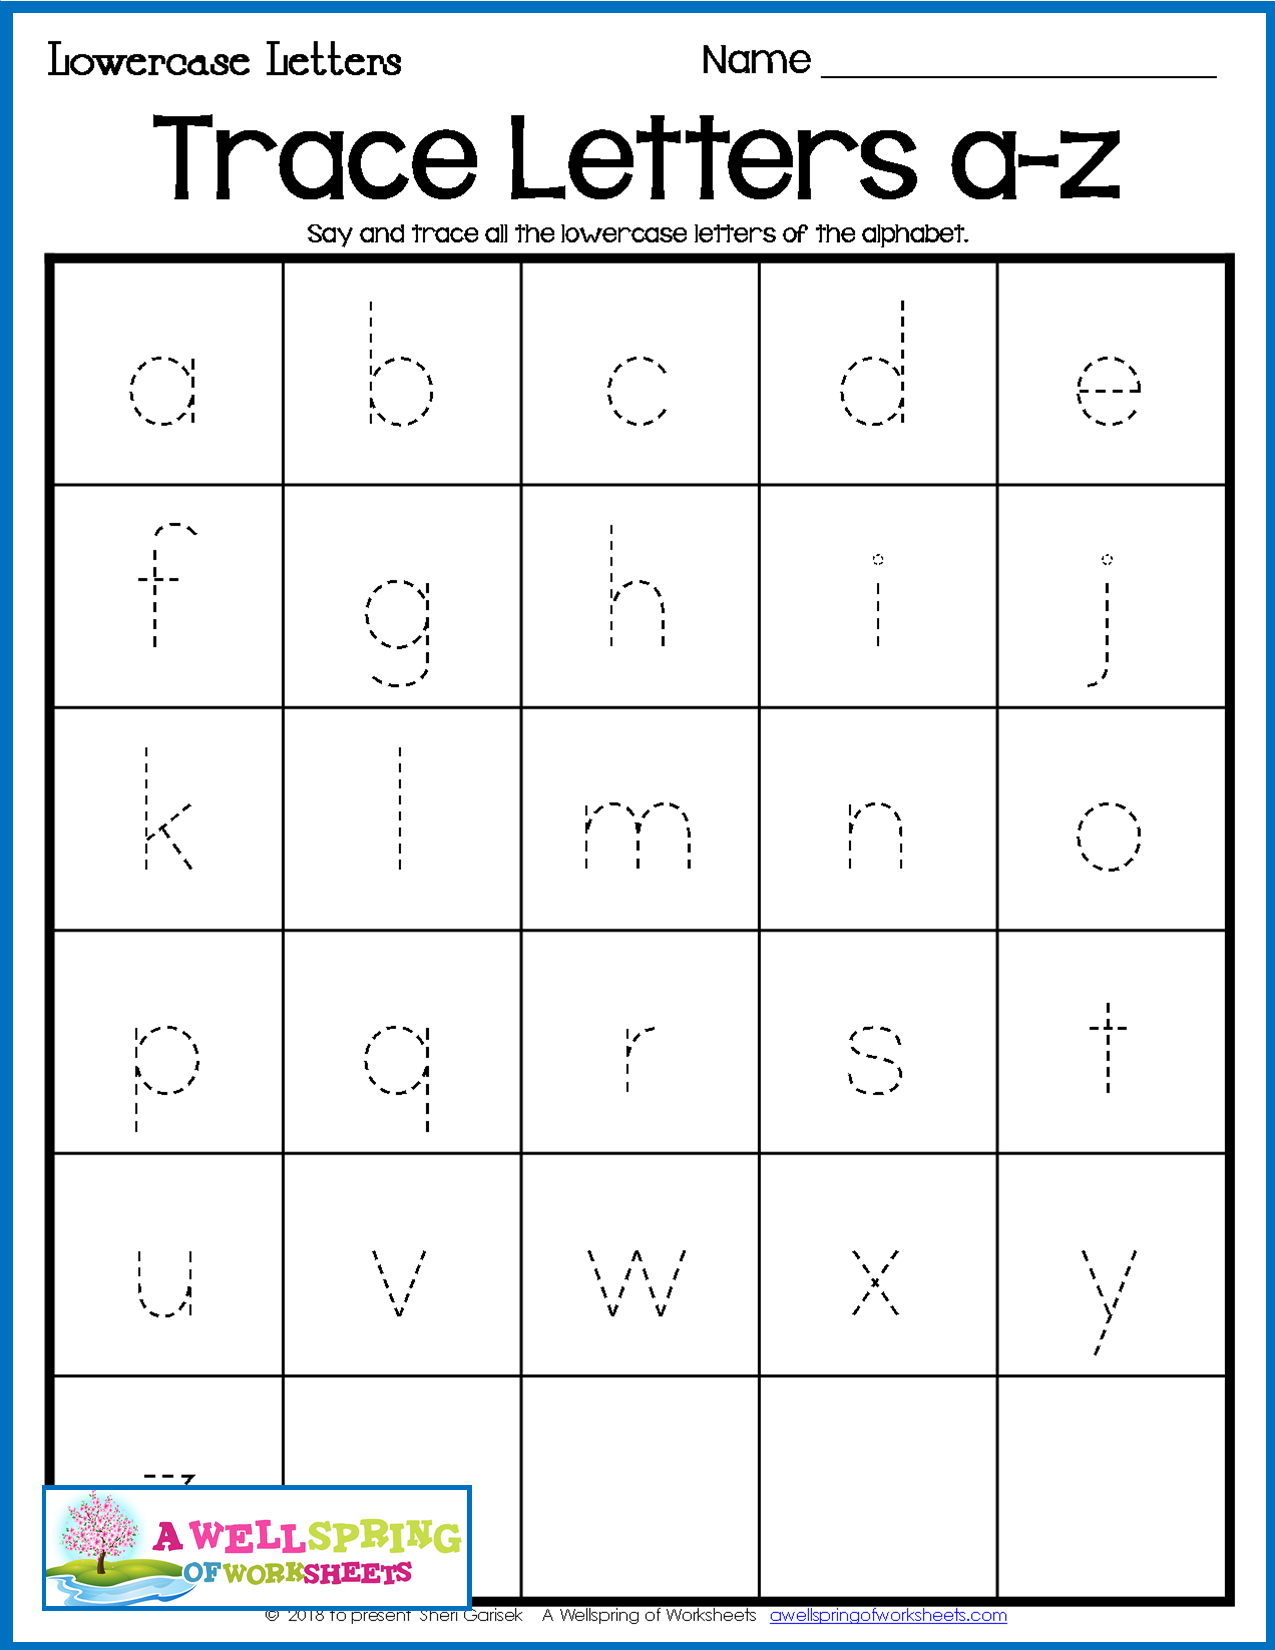 alphabet-tracing-worksheet-small-letters-tracinglettersworksheets